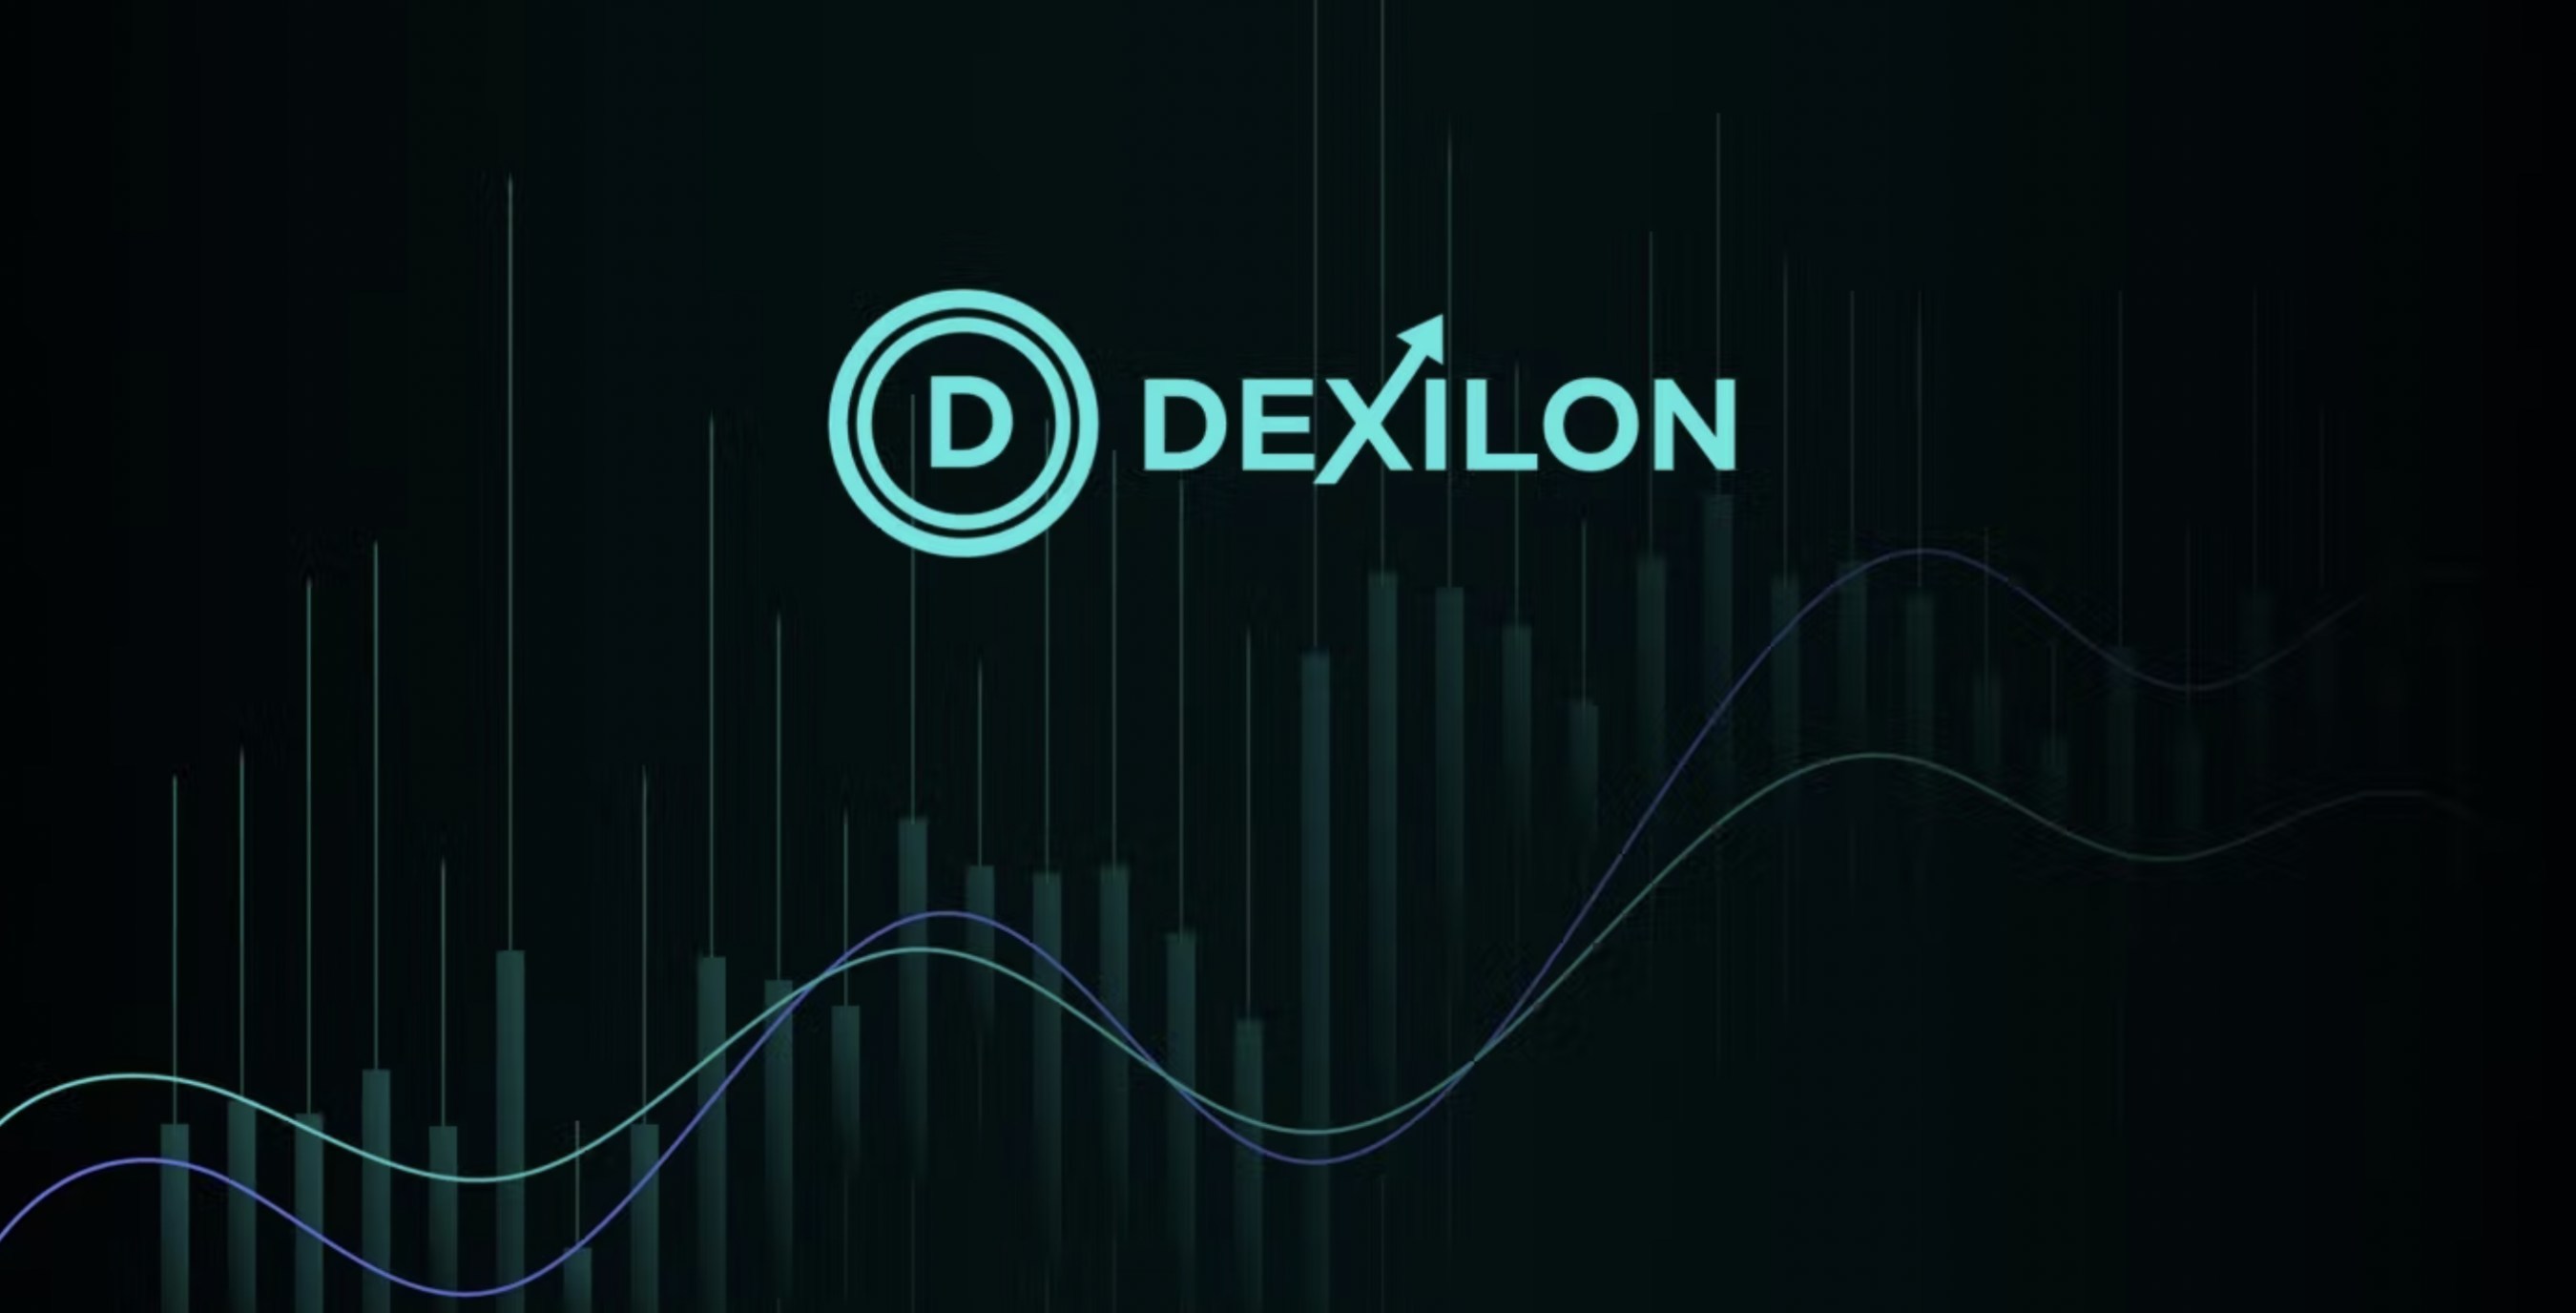 DEXILON Launches Testnet To Power The Future Of Derivatives Trading